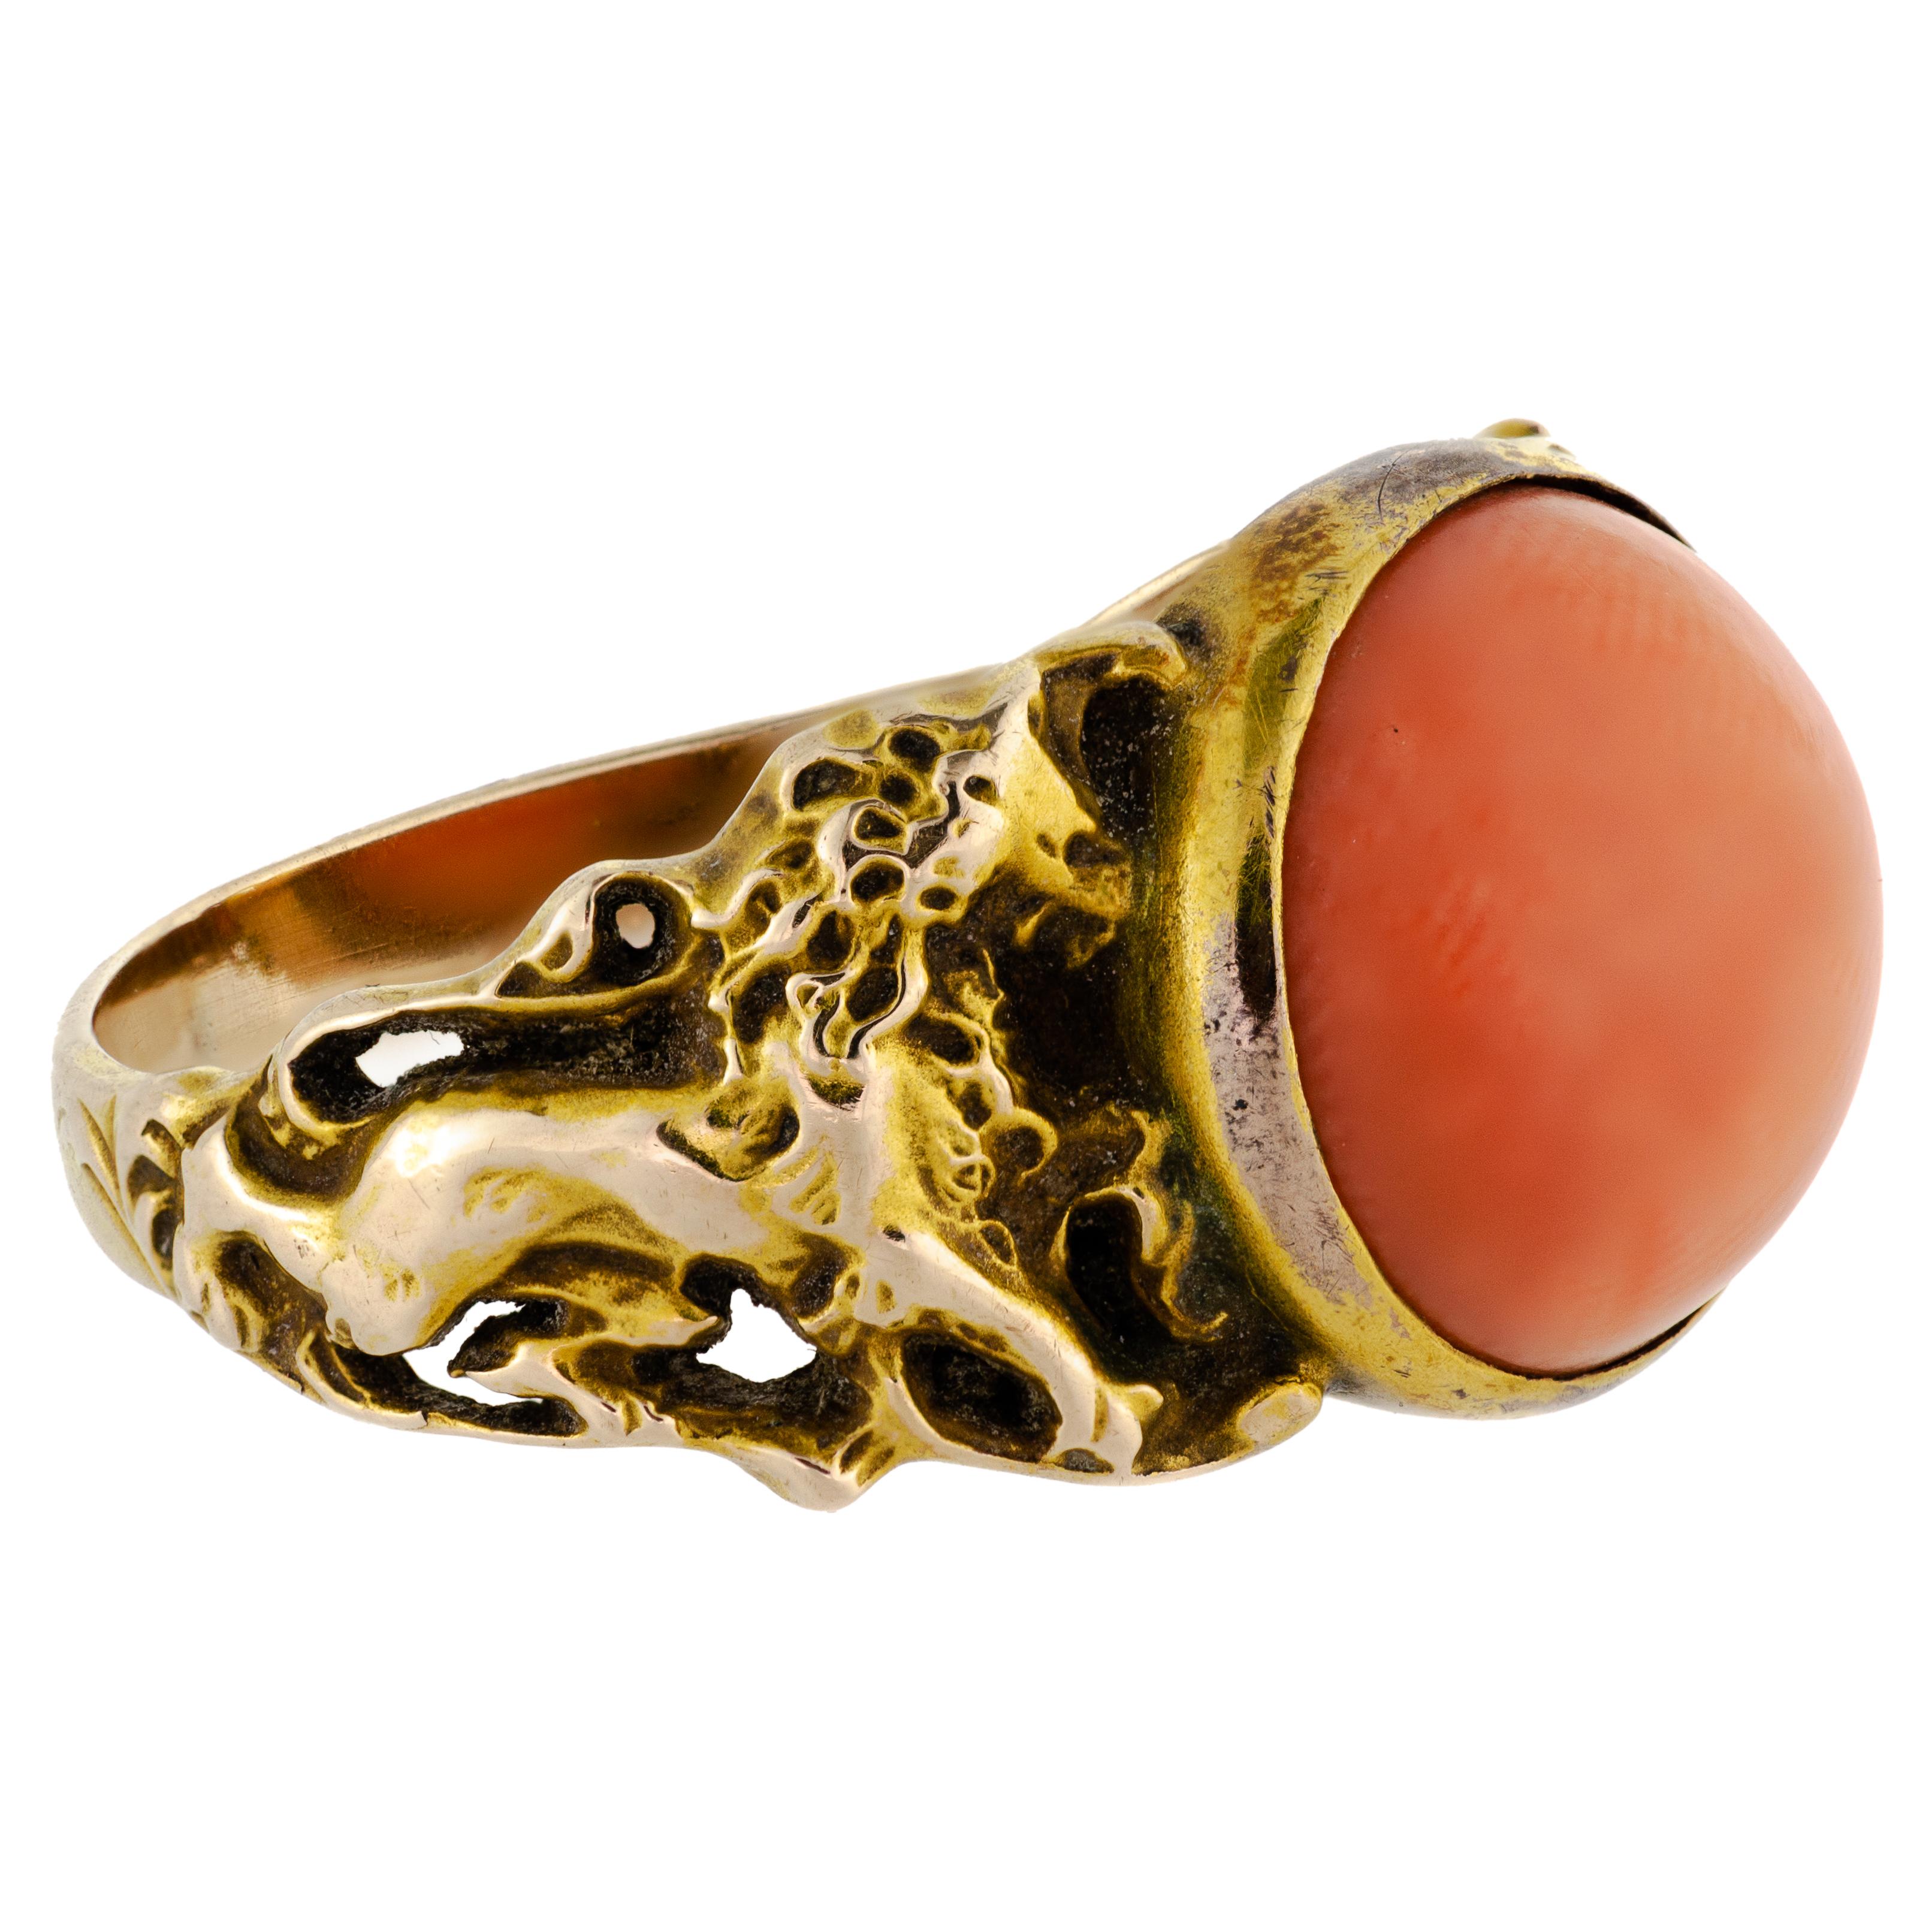 This stunning Art Nouveau ring dates back to the early 1900s and boasts an exquisite natural coral cabochon at its center. The cabochon is bezel set in a beautifully crafted floral openwork design mount of 14kt yellow gold. The intricate details of